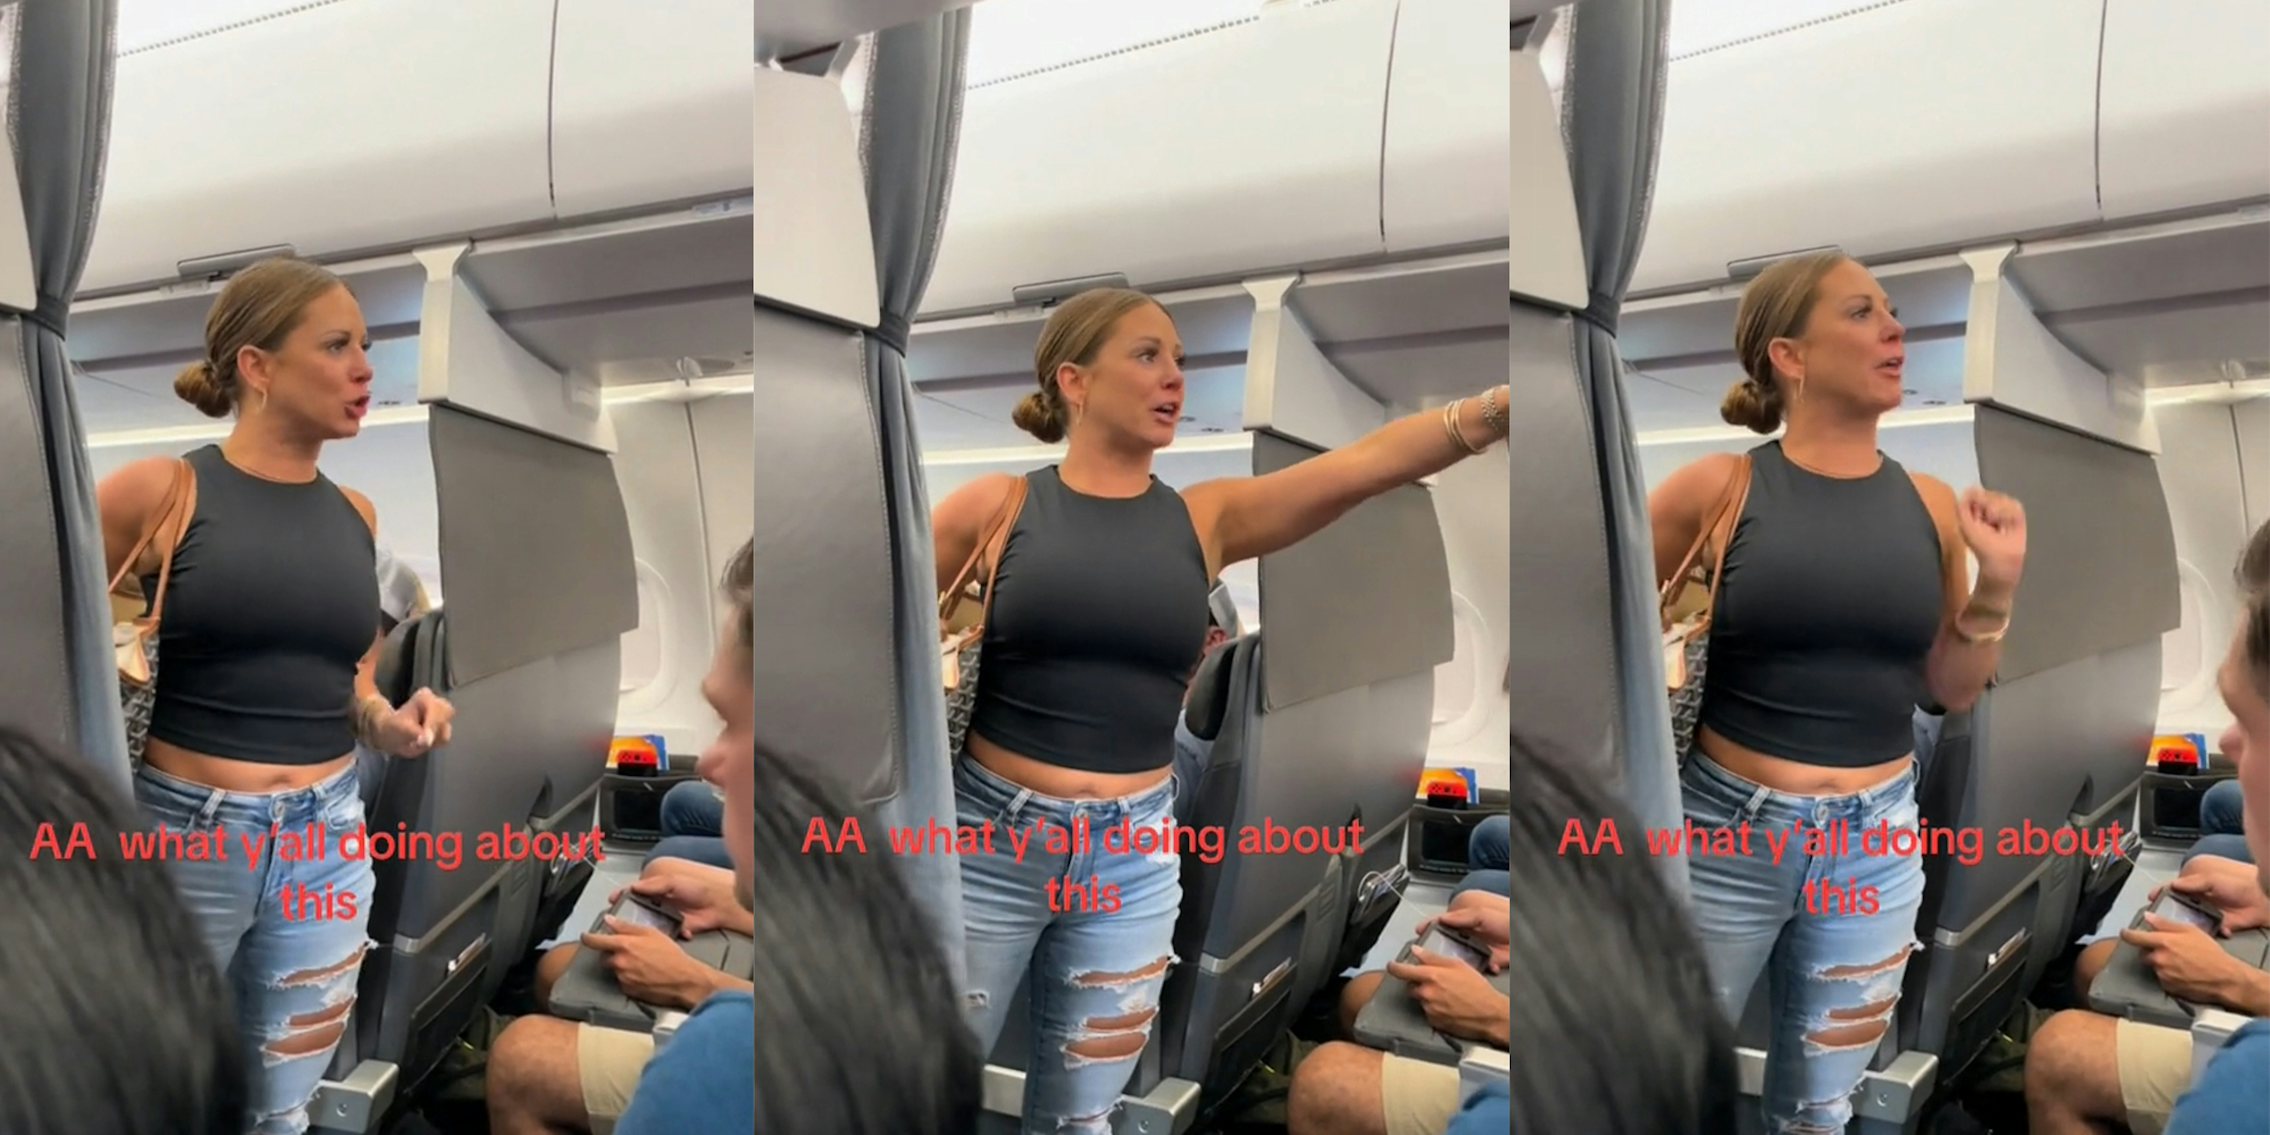 Drunk woman hallucinating on plane exits before takeoff